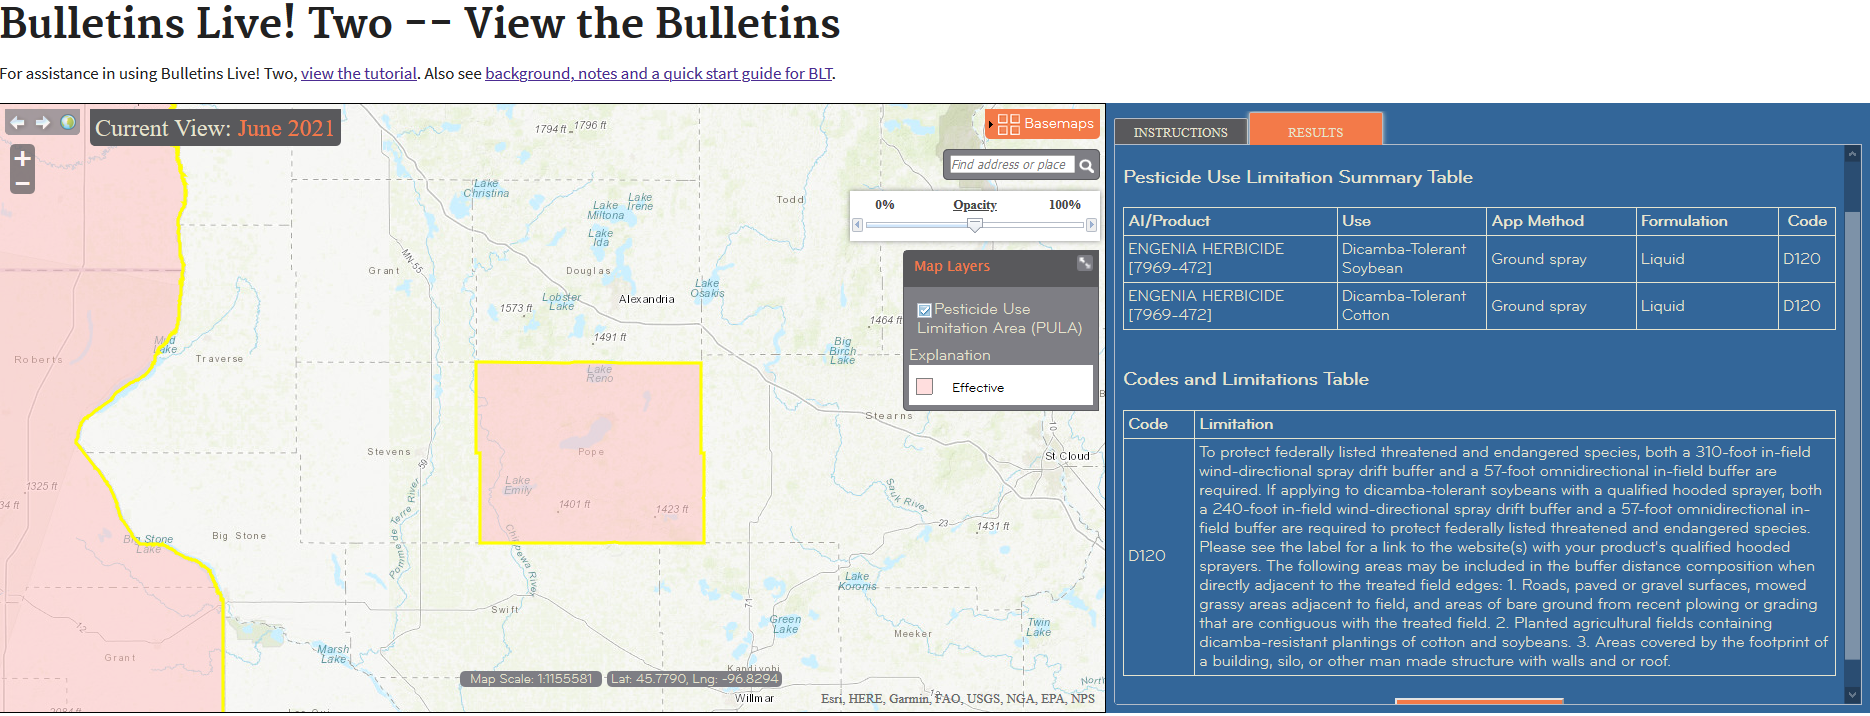 An example of the map and information provided by the EPA's Bulletins Live! Two site.